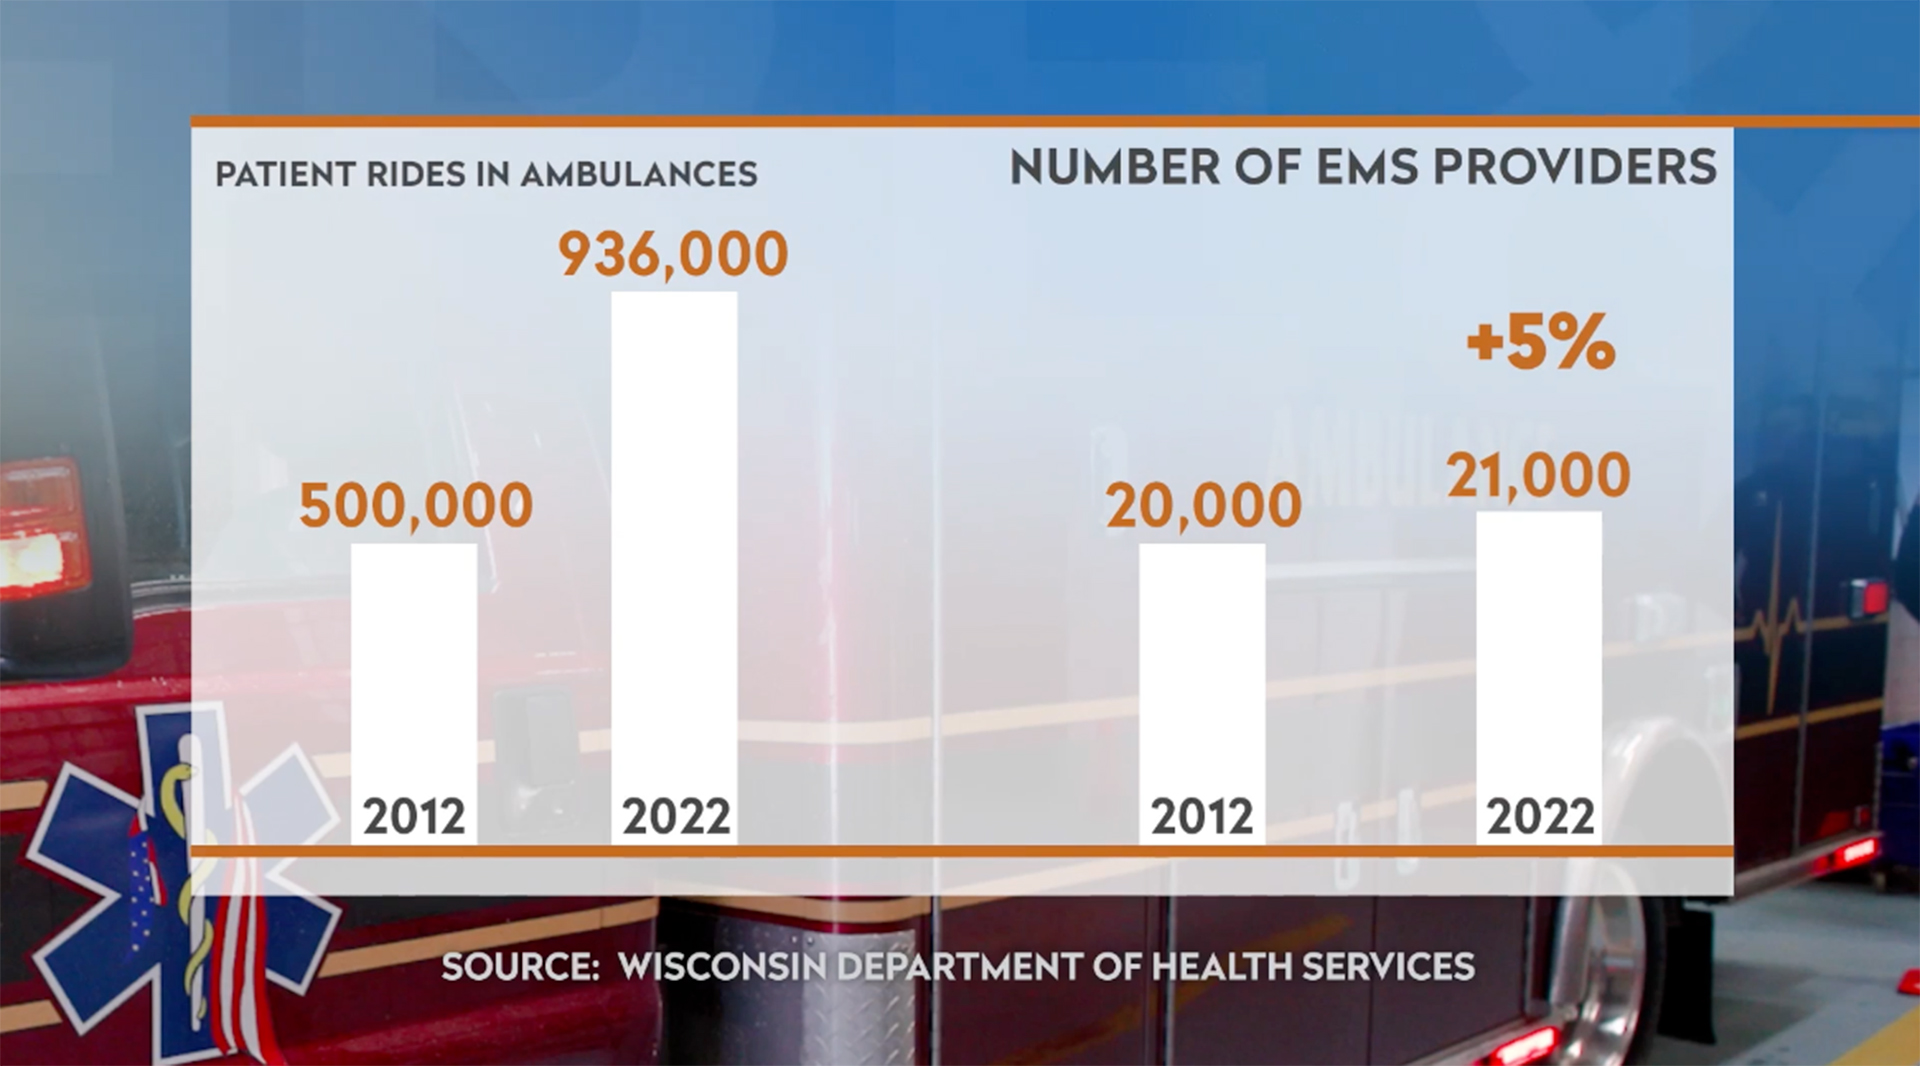 A chart shows that calls for EMS have increased by almost 100% since 2012, but EMS staffing has only increased by about 5%.